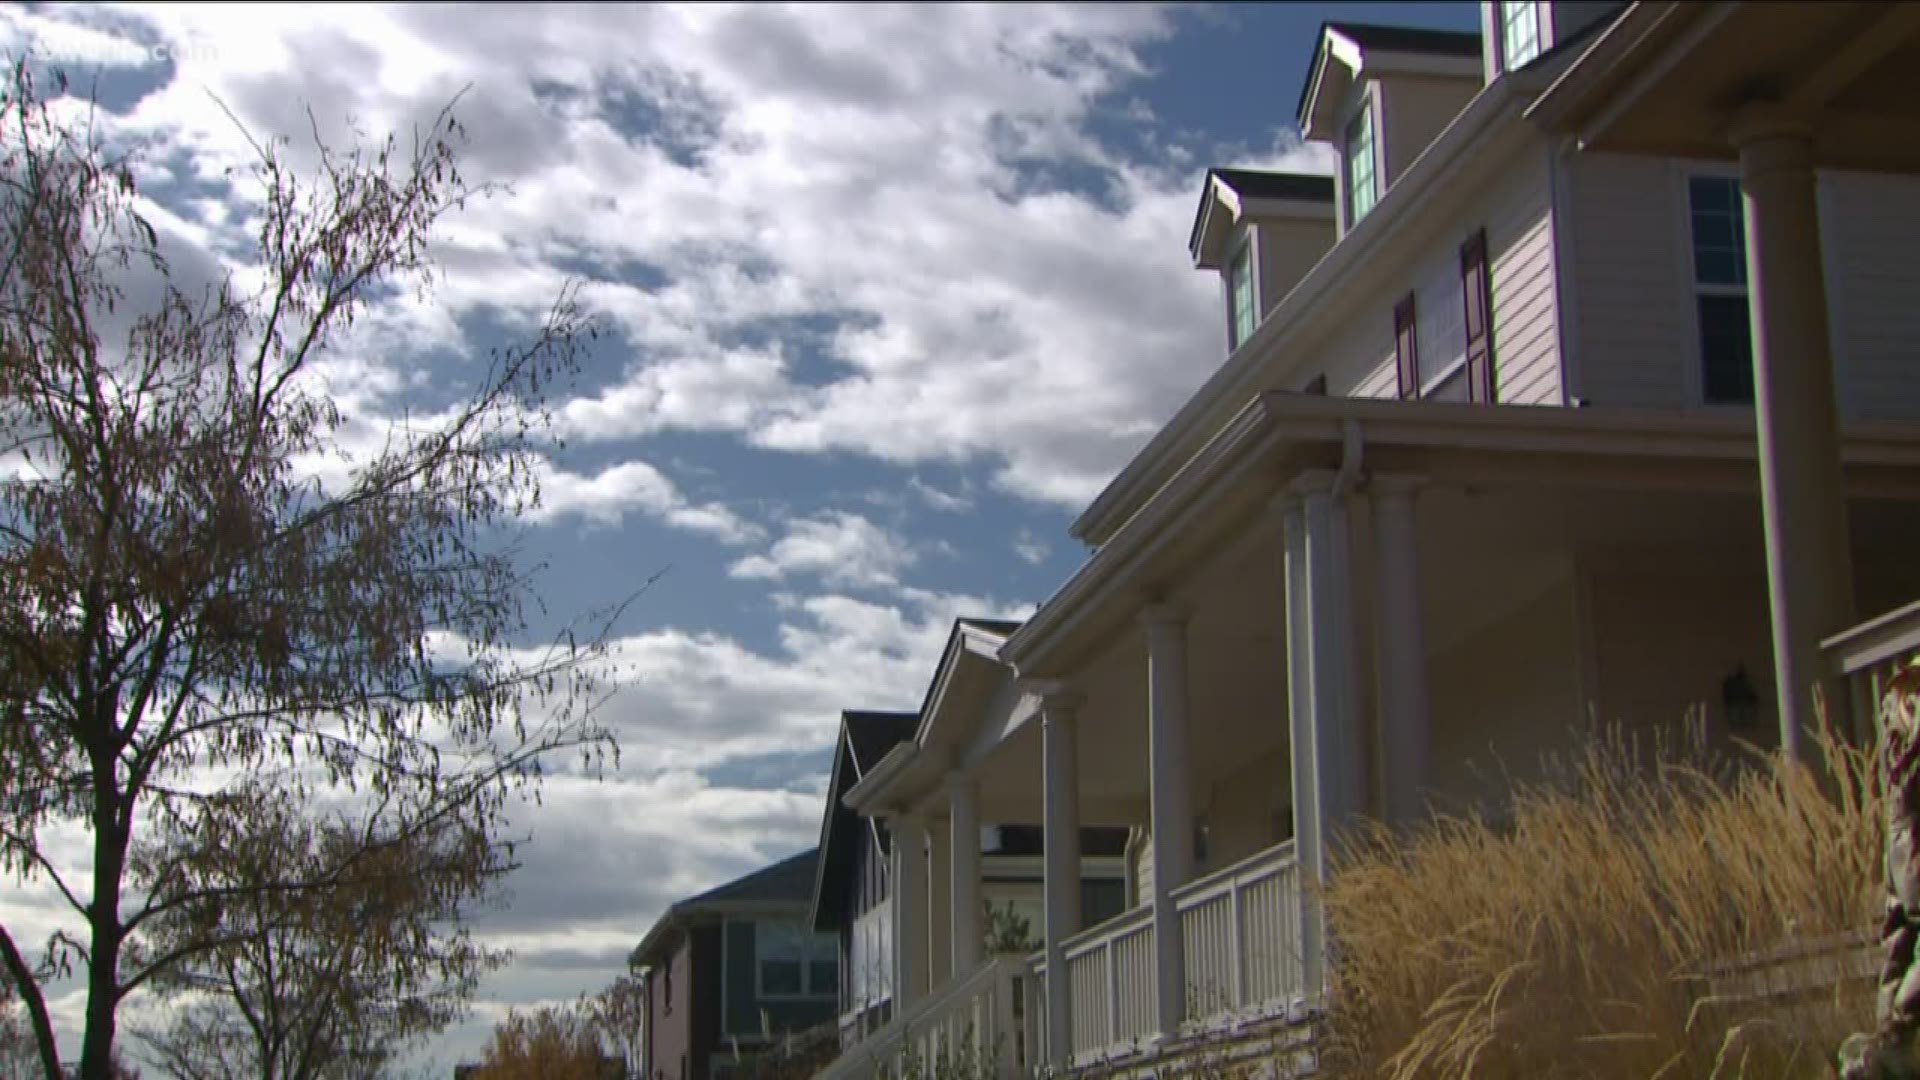 A new policy by the National Association of REALTORS hopes to give buyers all the options.